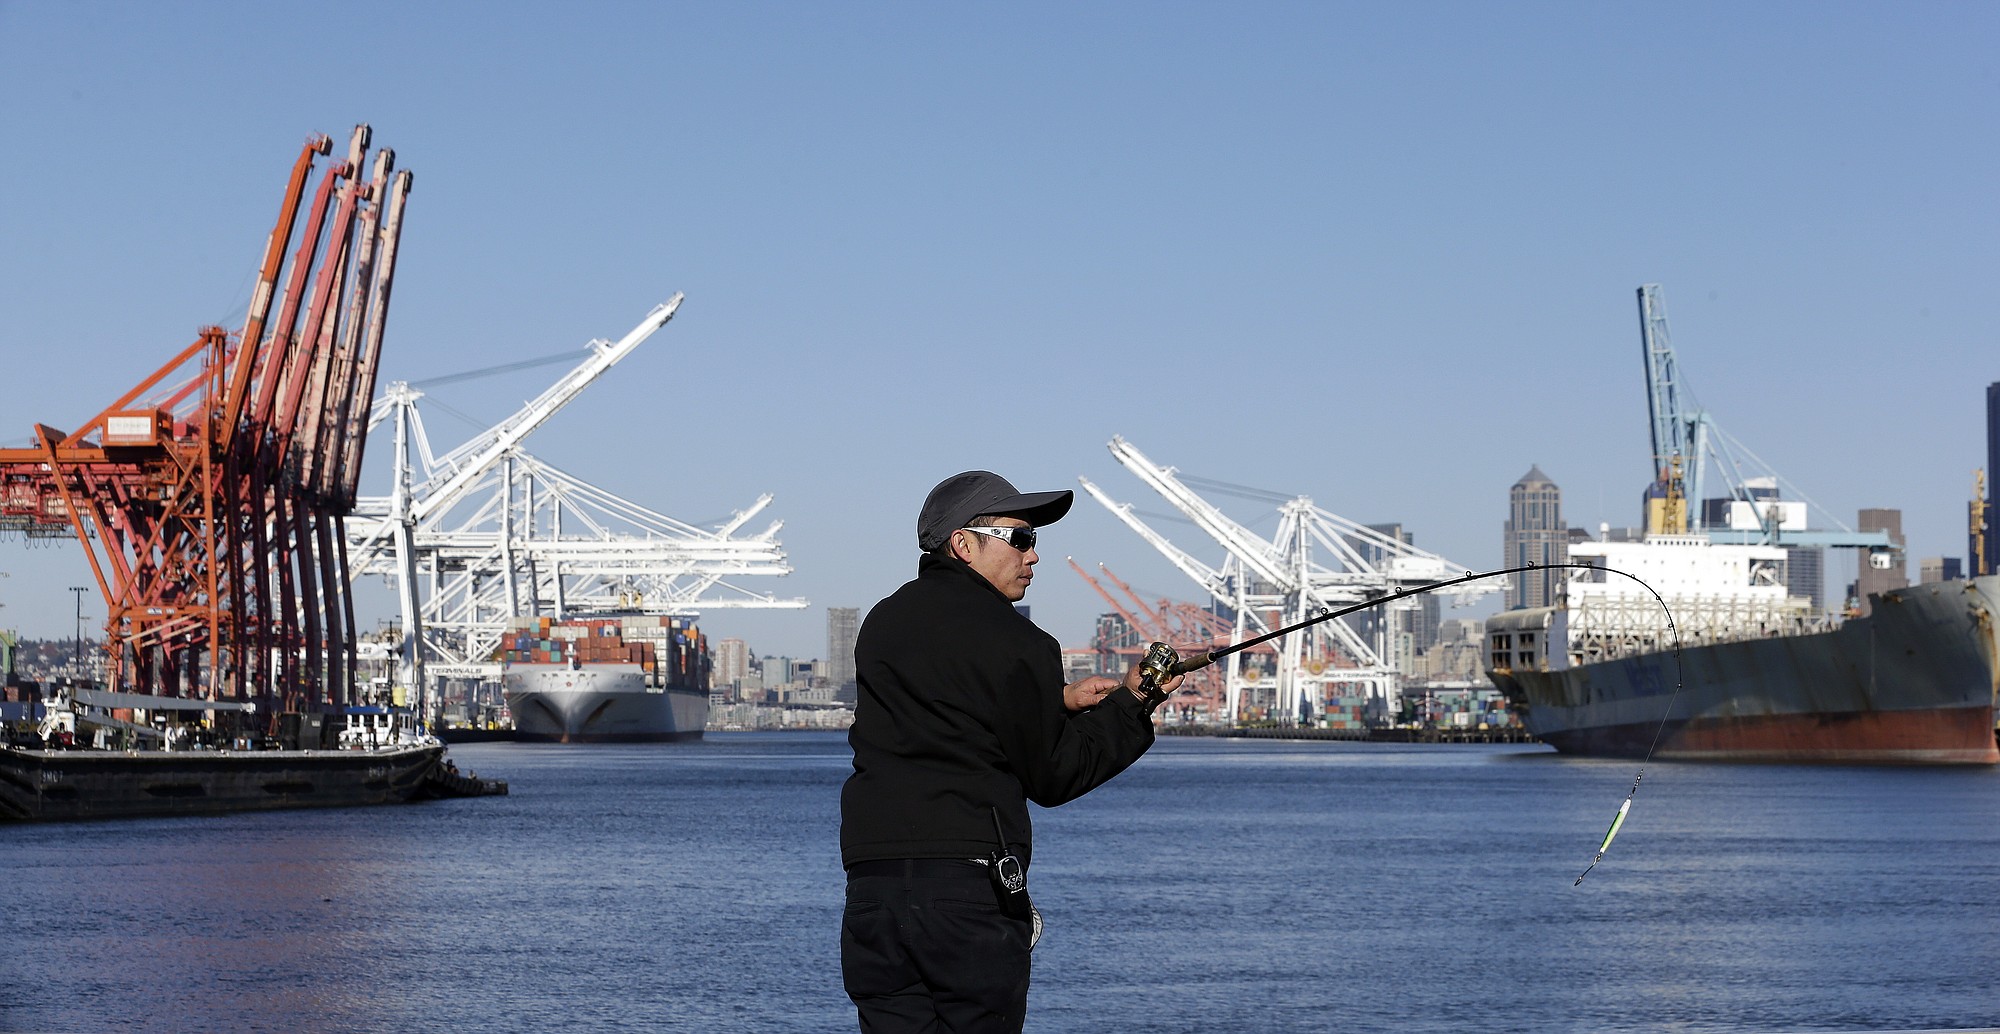 A fisherman readies a cast into the Duwamish Waterway in view of container ships moored at the Port of Seattle's seaport just south of downtown. The U.S.